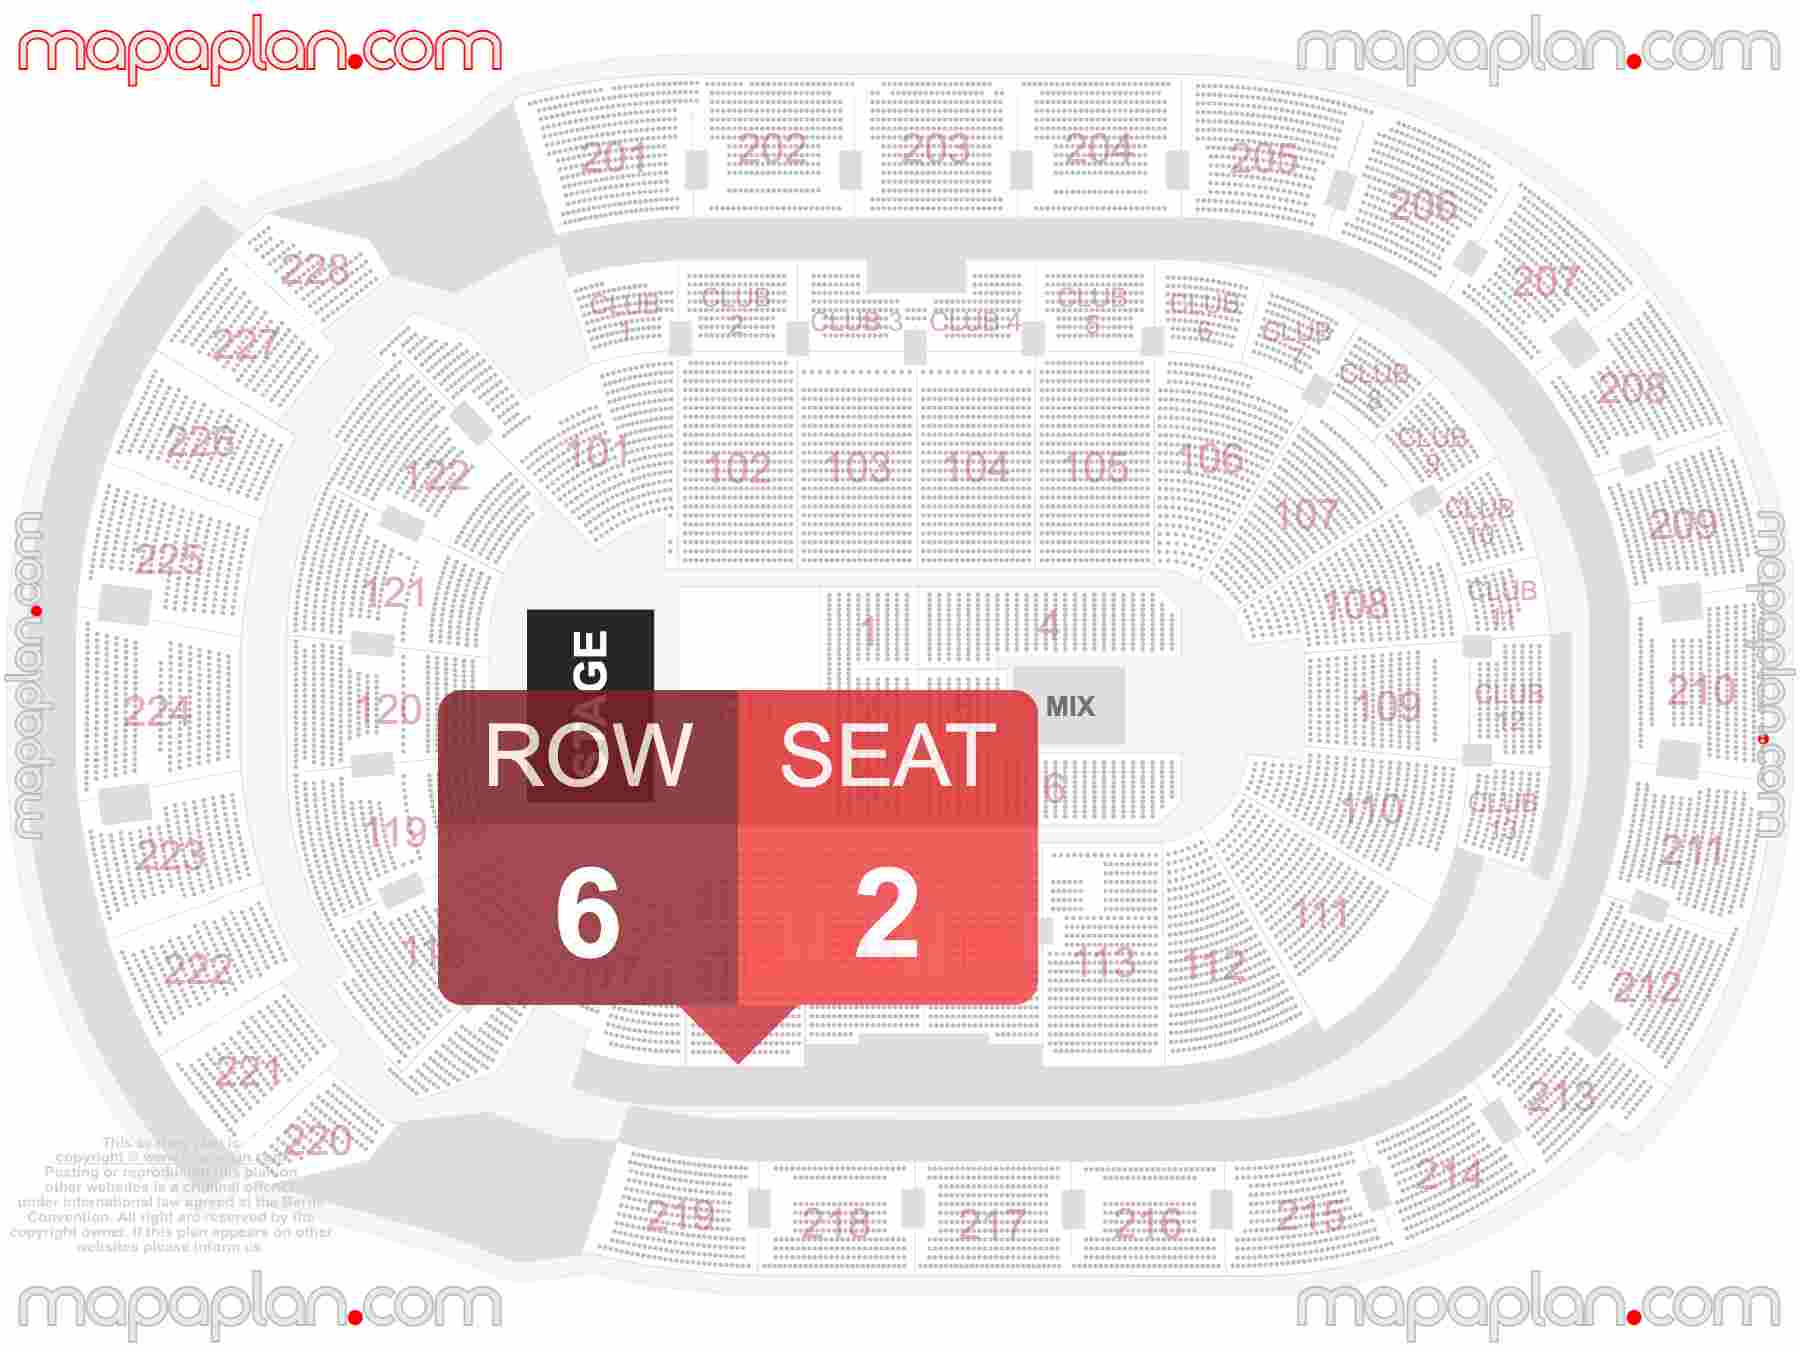 Columbus Nationwide Arena seating chart Concert with PIT floor standing find best seats row numbering system plan showing how many seats per row - Individual 'find my seat' virtual locator